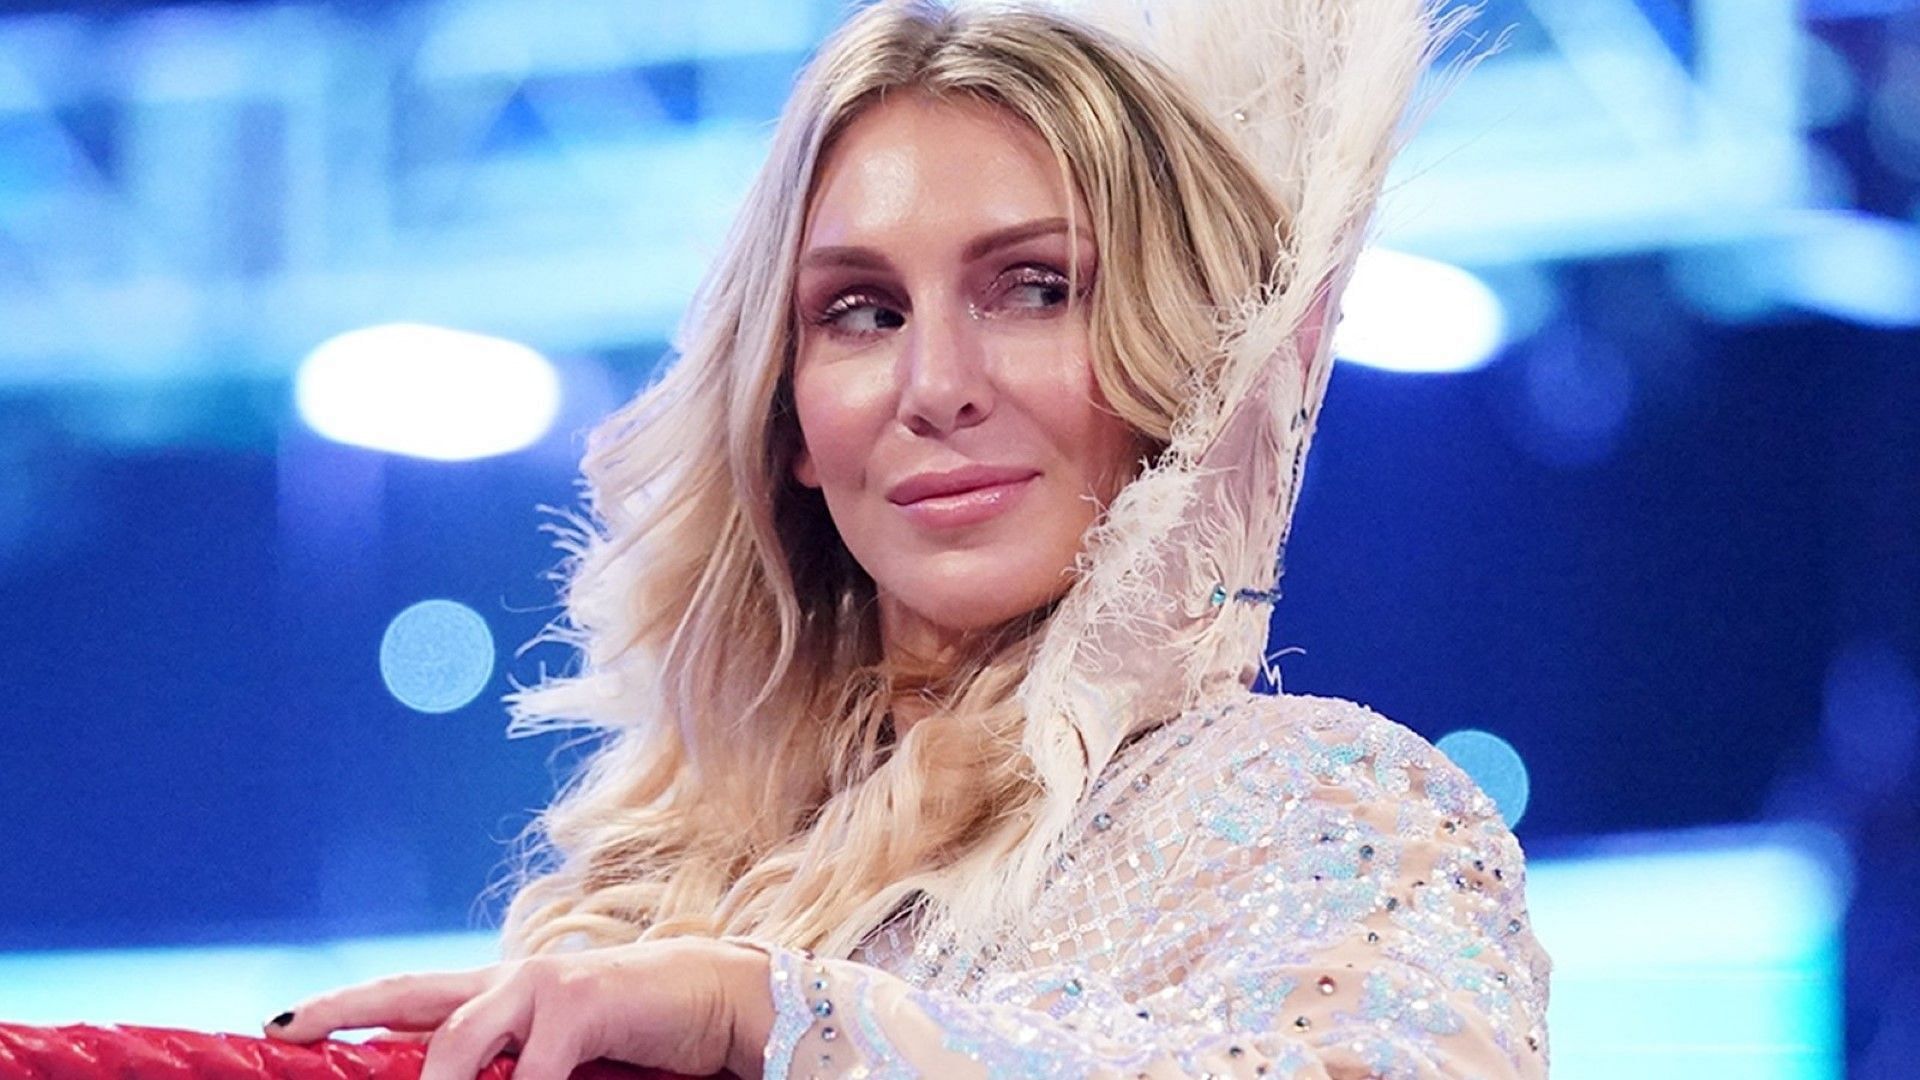 Charlotte Flair stands tall in the WWE RAW ring